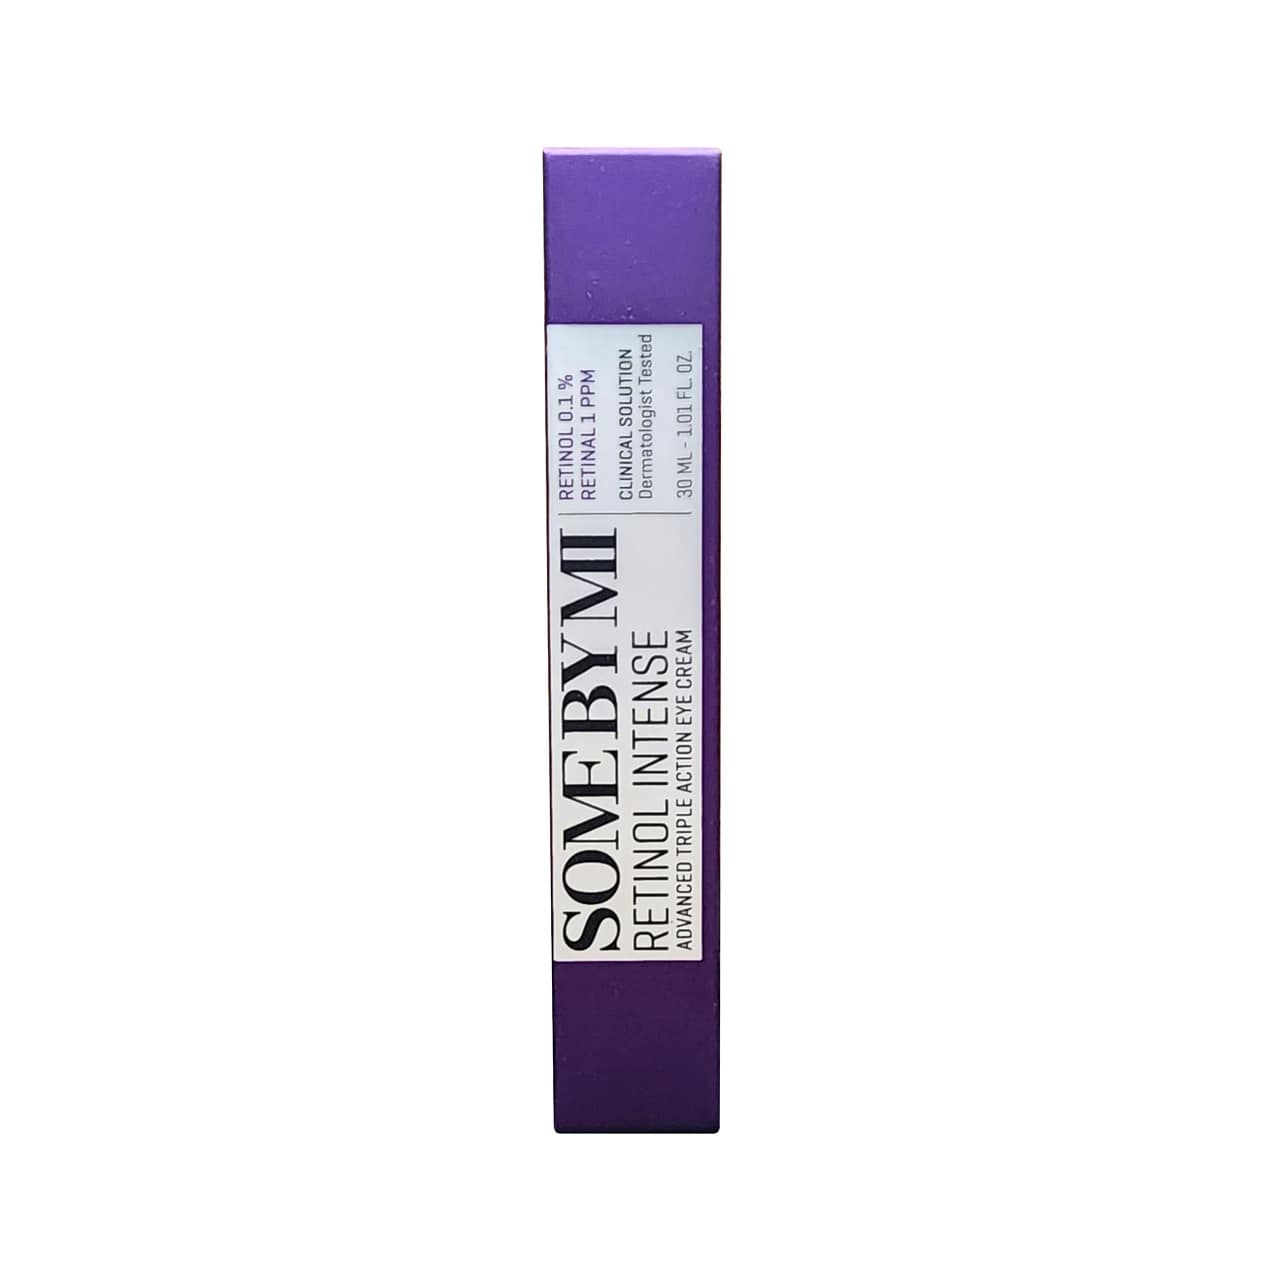 Product label for SOME BY MI Retinol Intense Advanced Triple Action Eye Cream (30 mL)